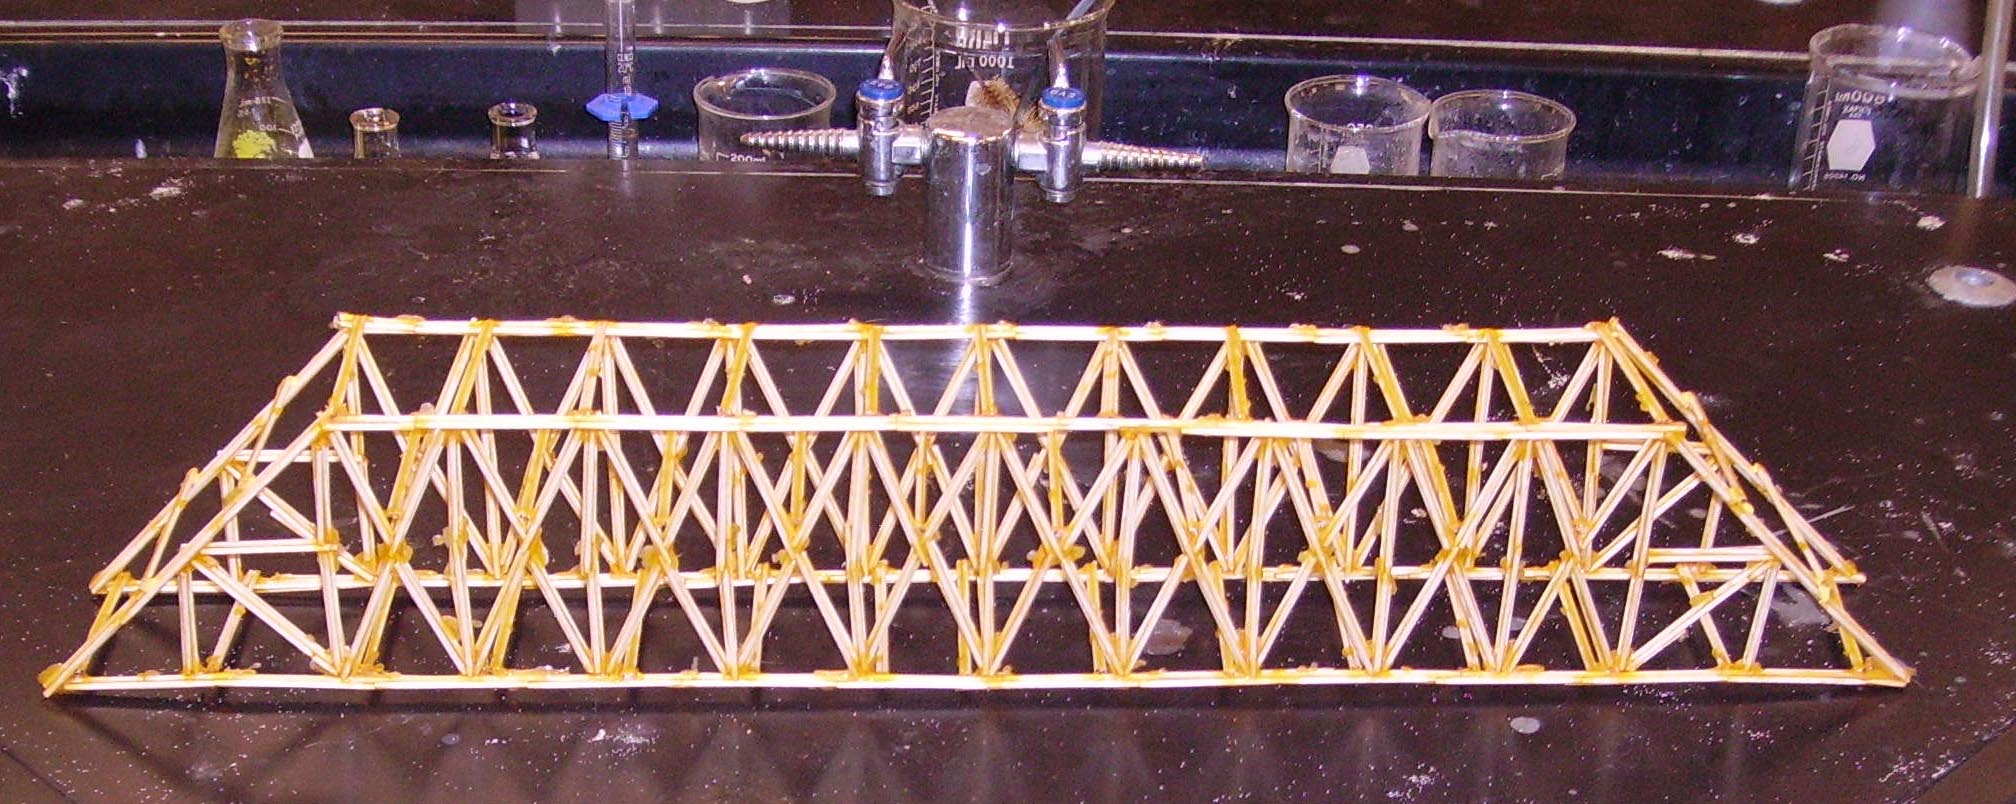 how to build a bridge out of toothpicks